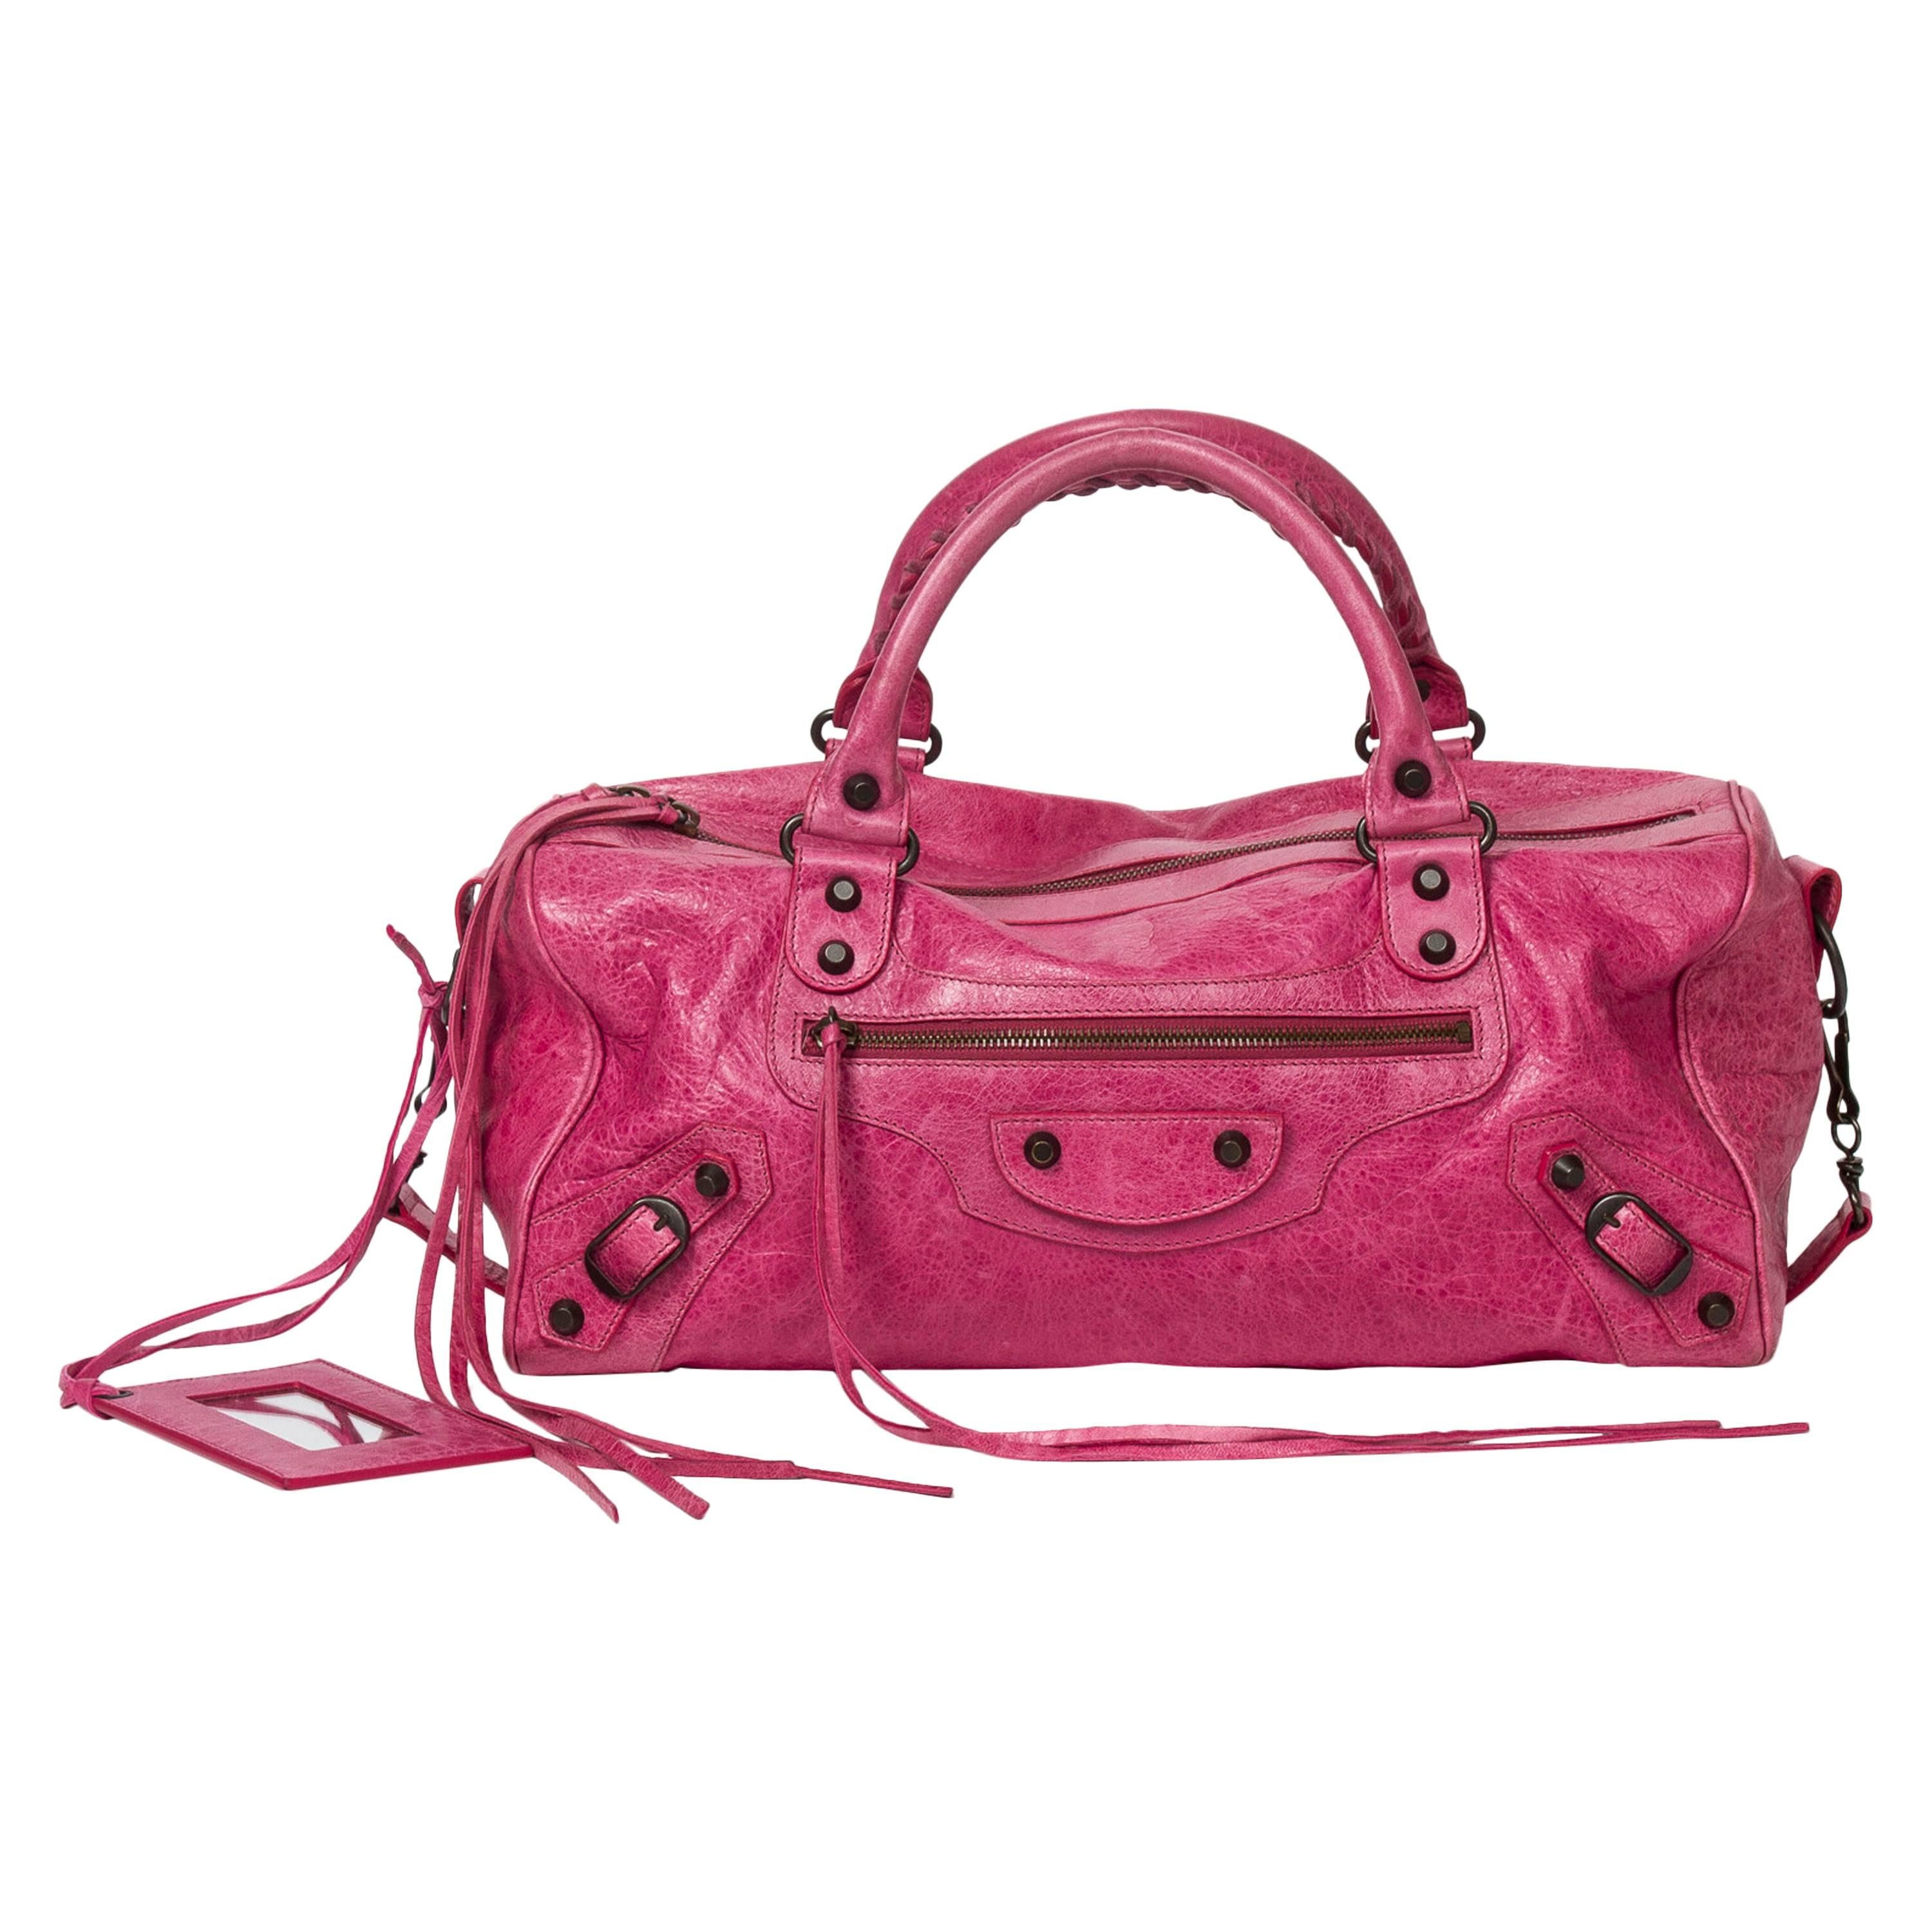 Balenciaga City Bag Pink Distressed Leather For Sale